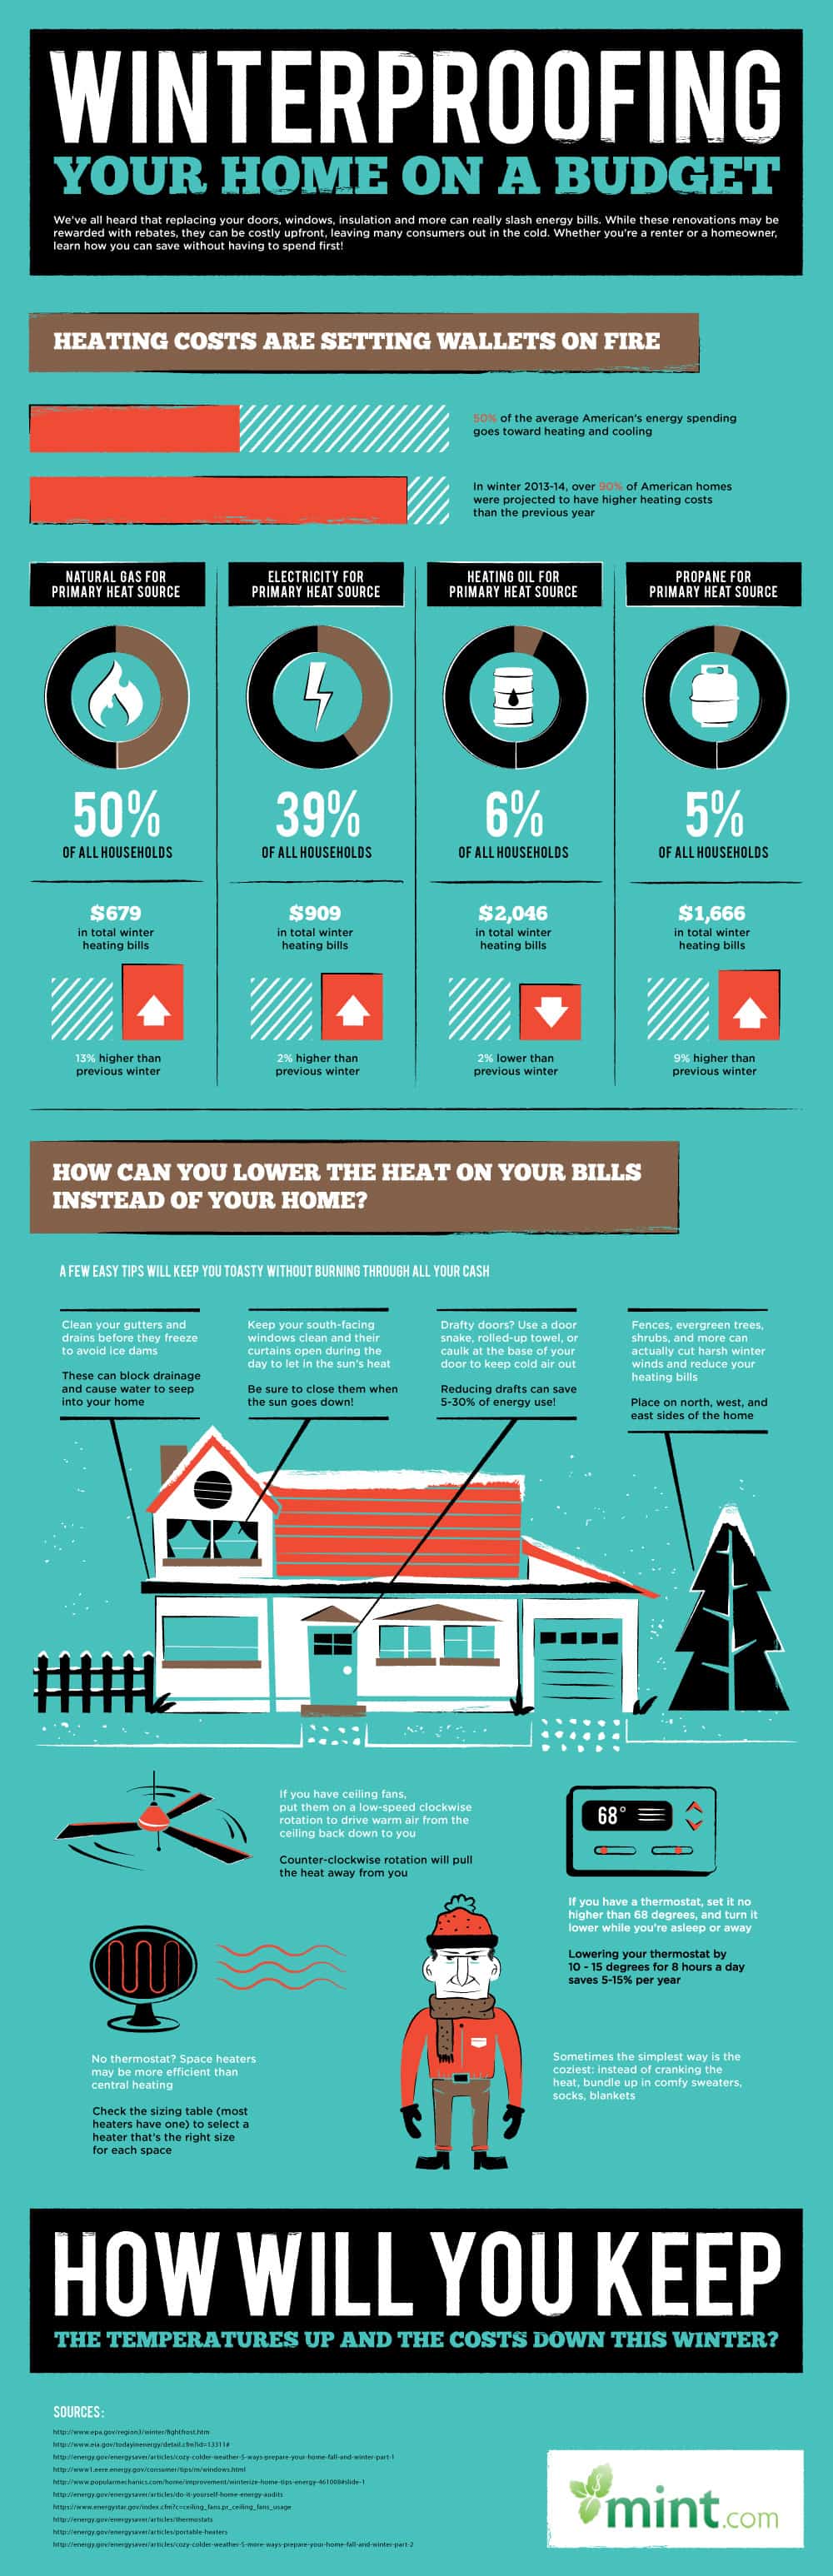 How To Winterproof your Home on a Budget (Infographic)